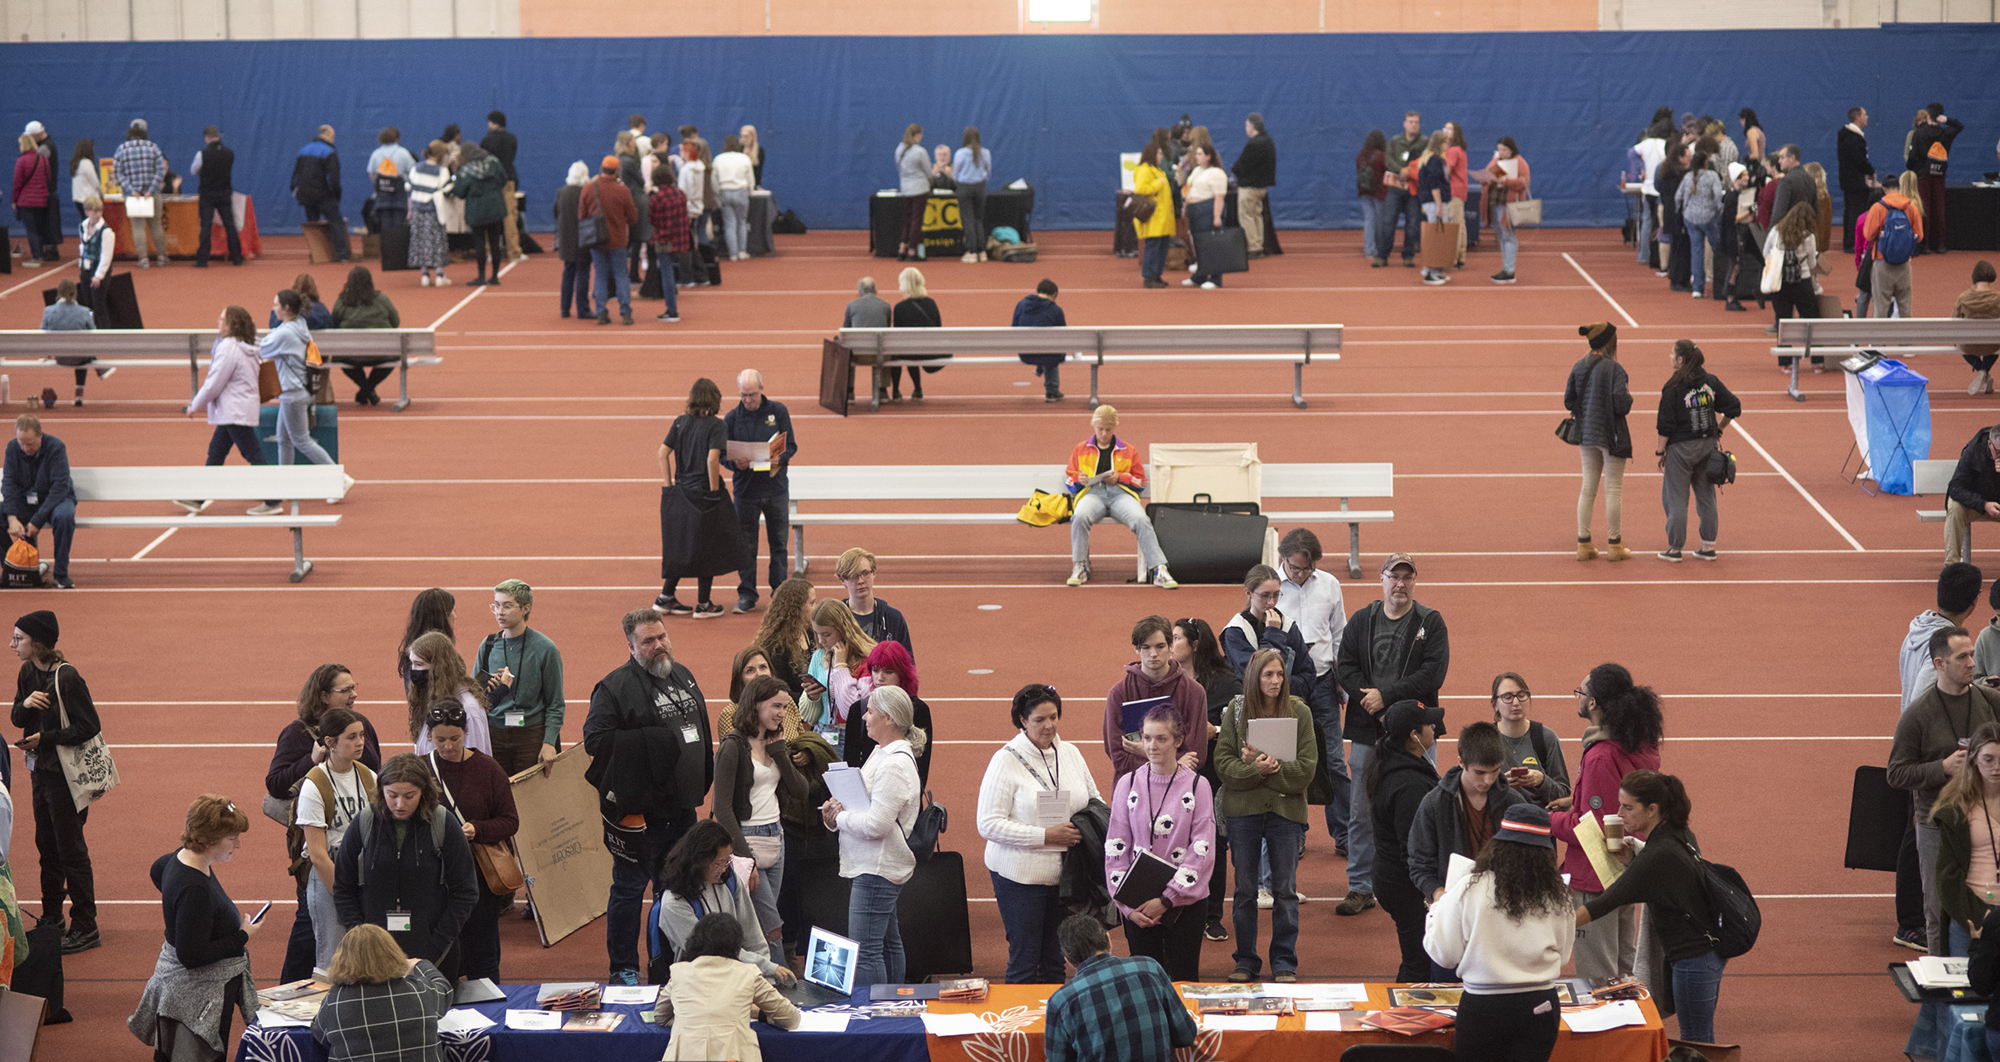 A wide view of the field house during RIT's NPD event on Oct. 2, 2022.